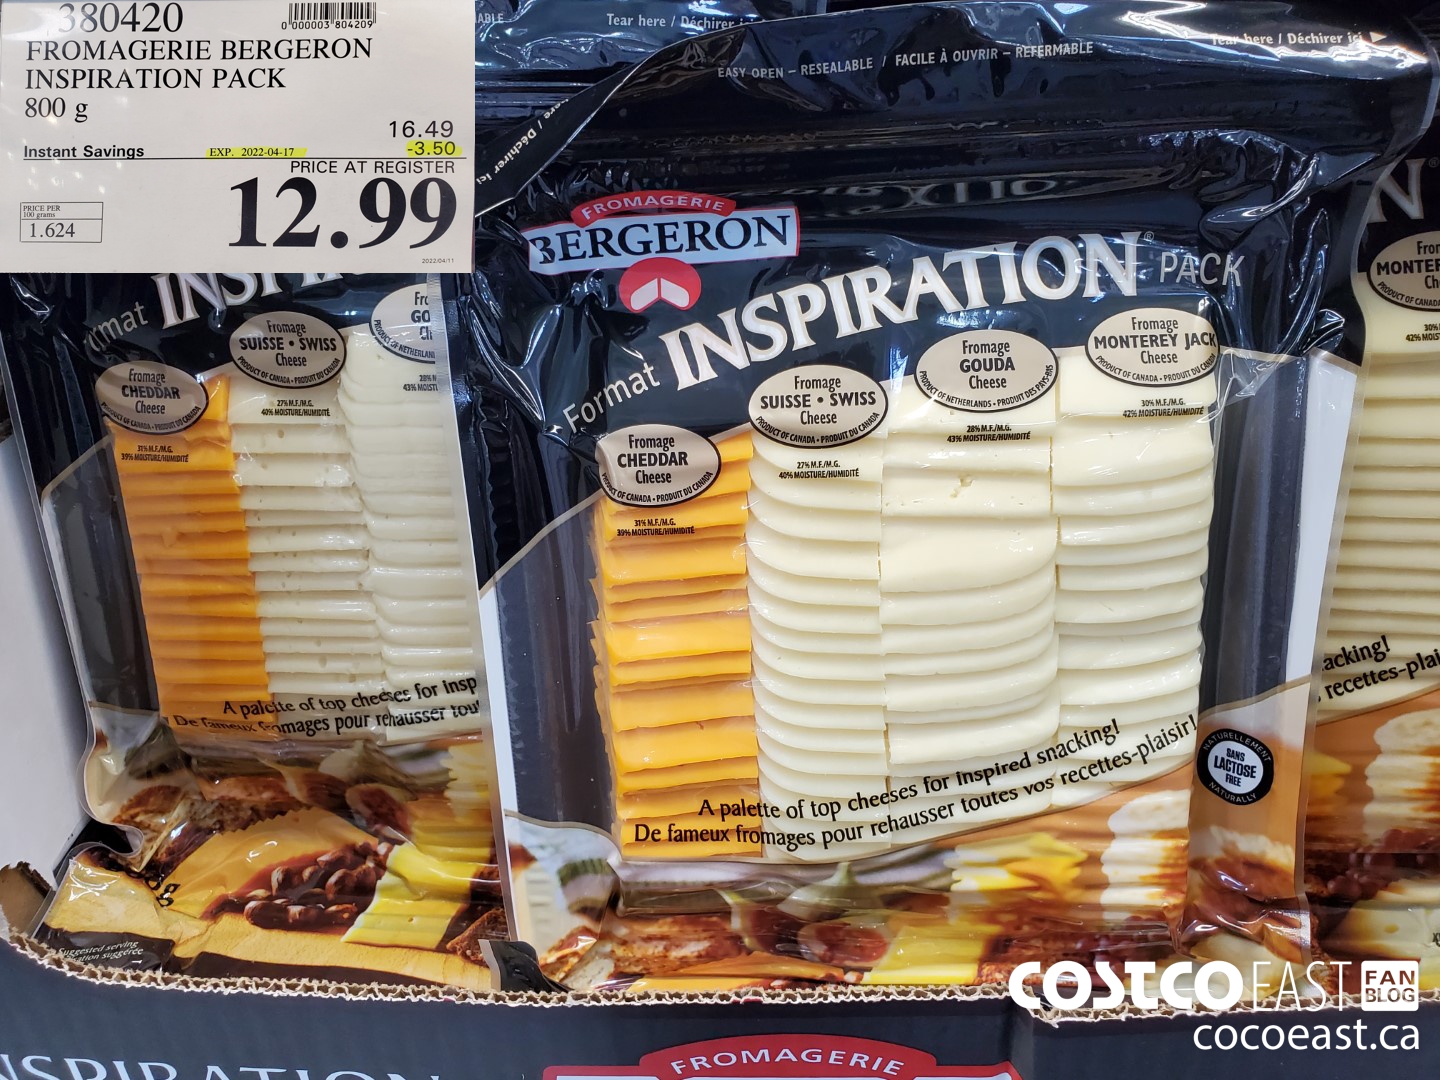 Go gotta try this Stonemill carmelized onion dip at Costco with